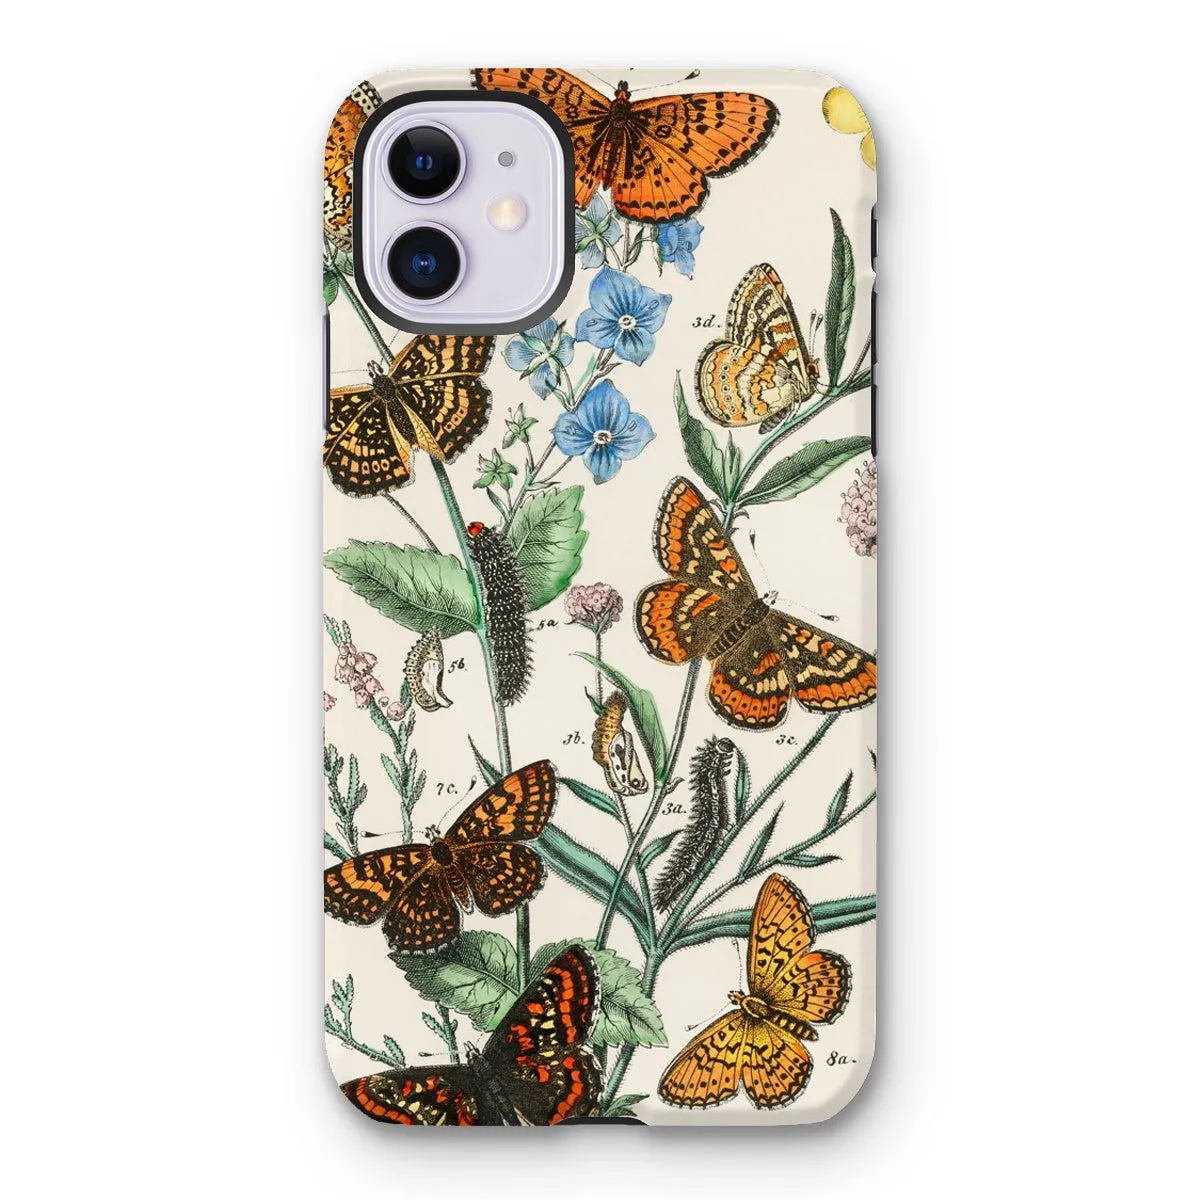 European Butterflies And Moths 2 Art Phone Case - William Forsell Kirby - Iphone 11 / Matte - Mobile Phone Cases